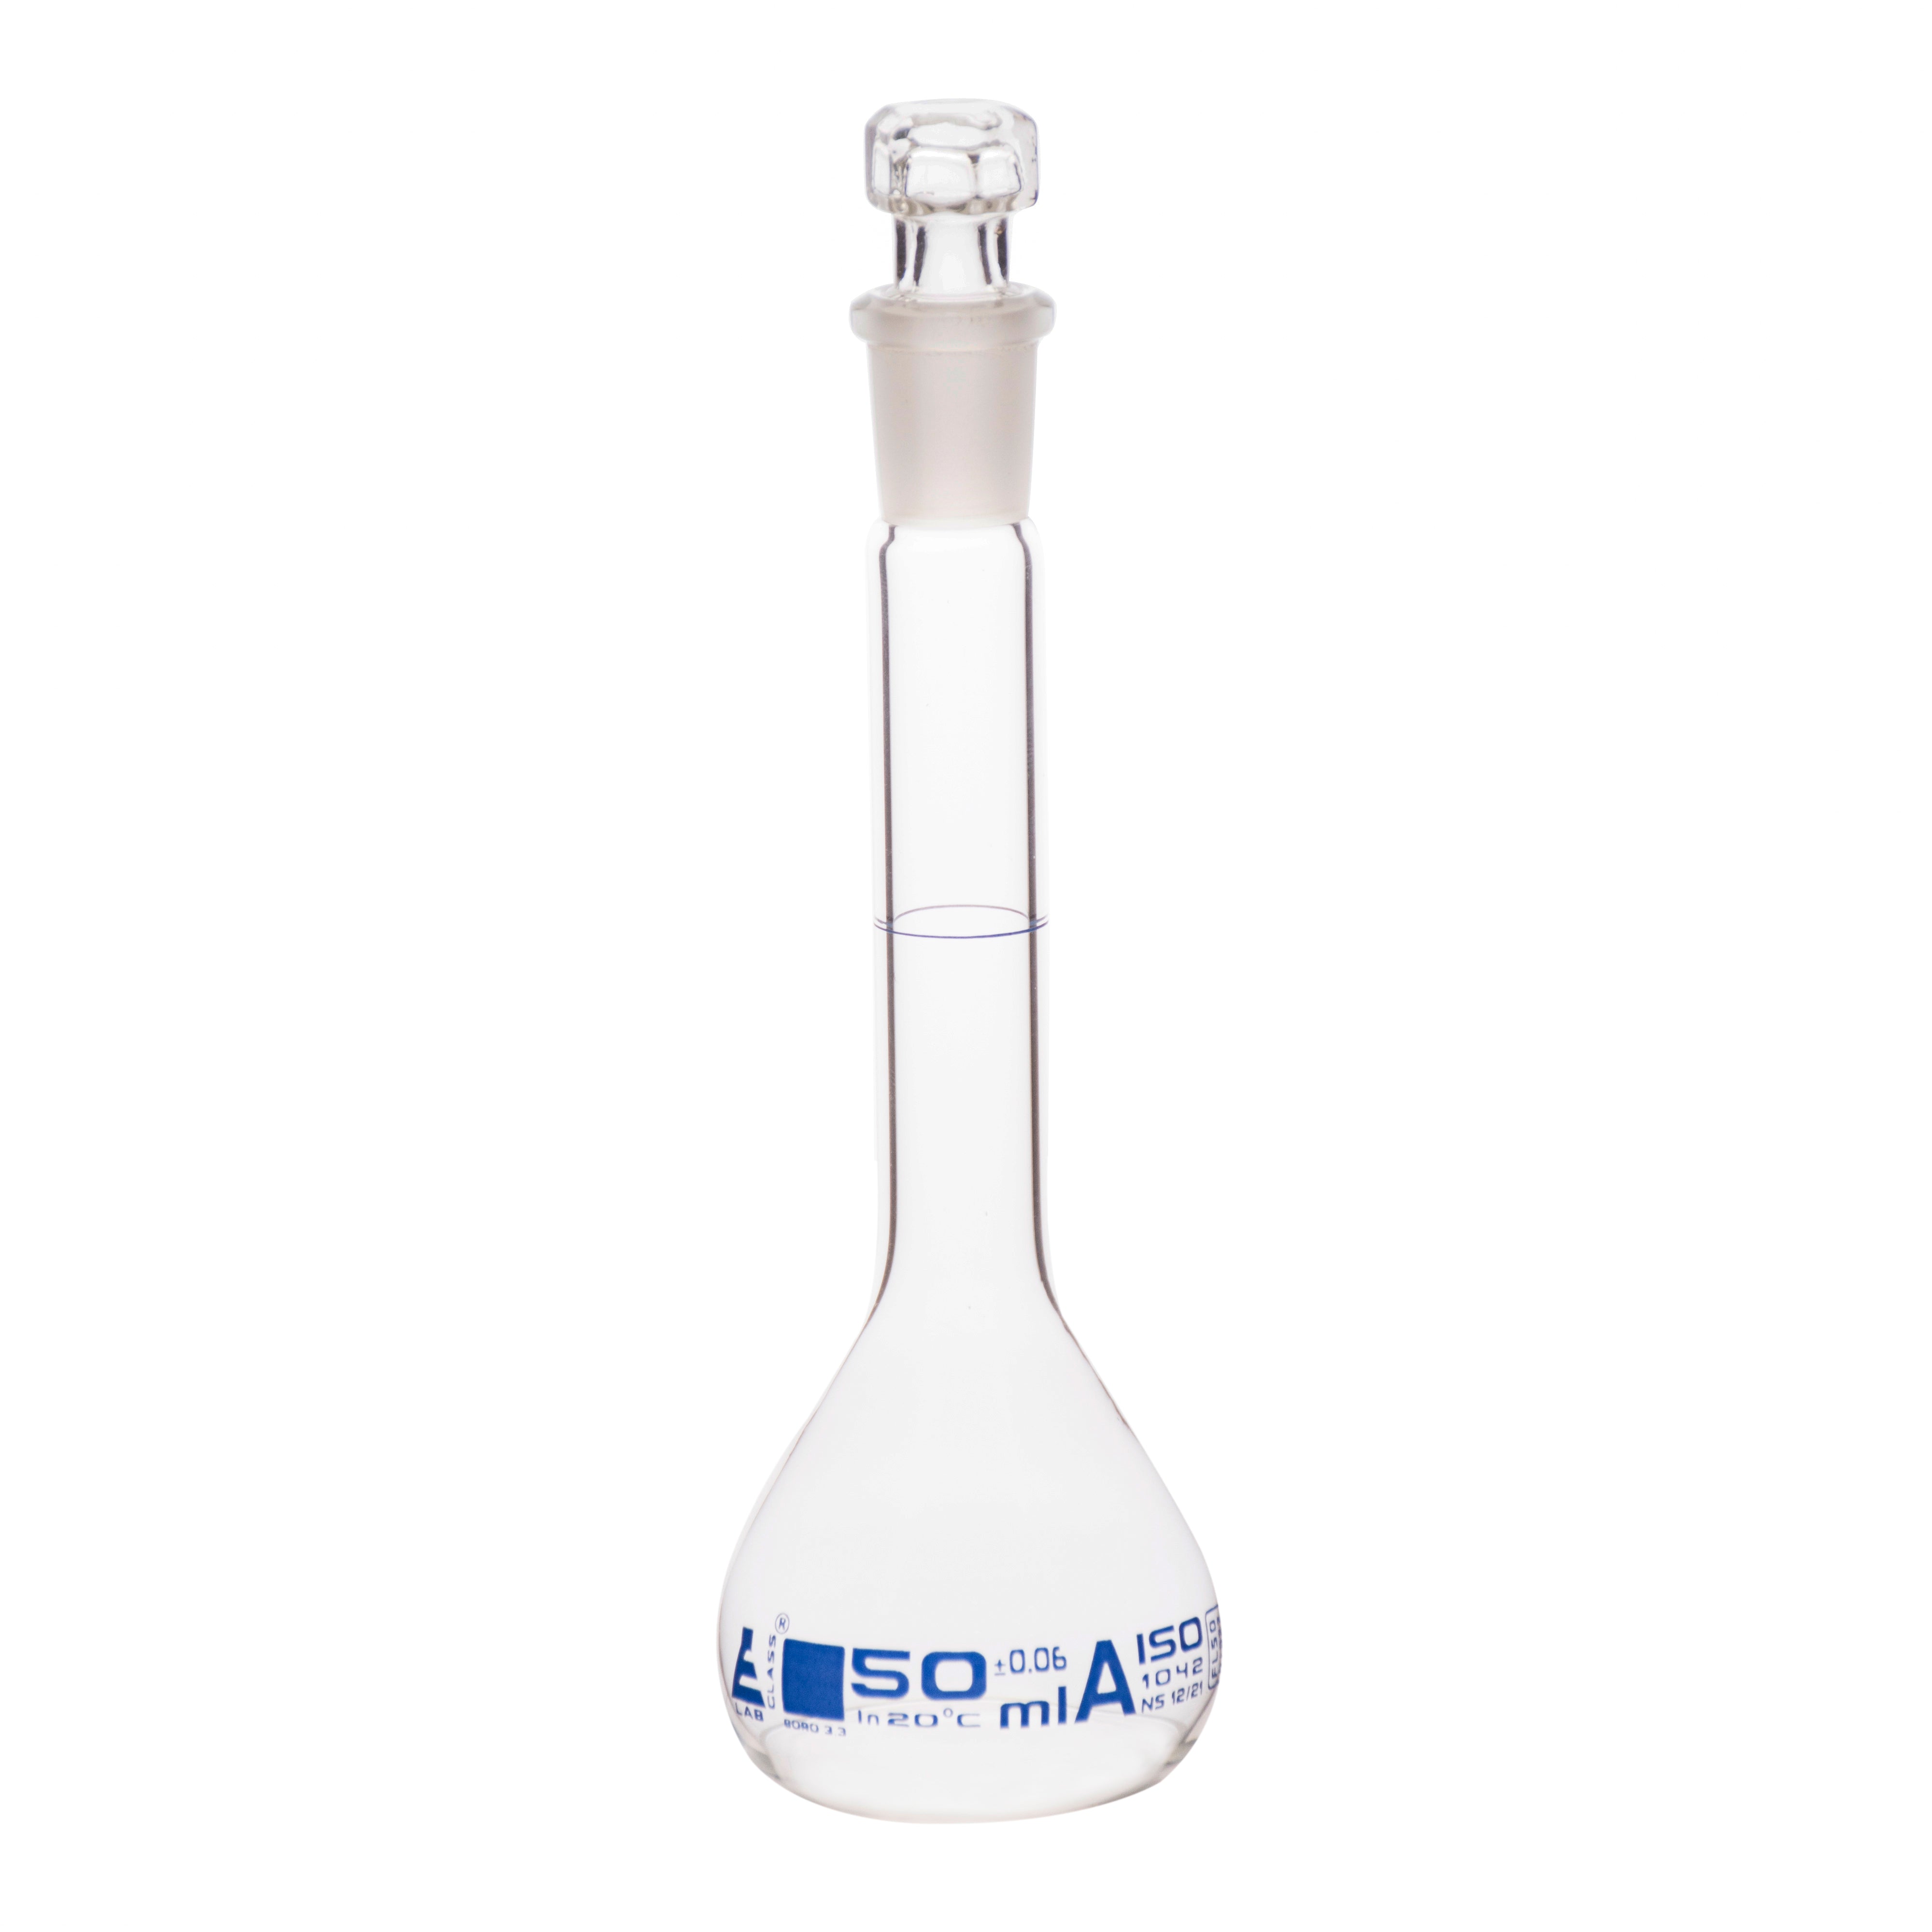 Borosilicate Volumetric Flask with Hollow Glass Stopper, 50ml, Class A, Blue Print, Autoclavable